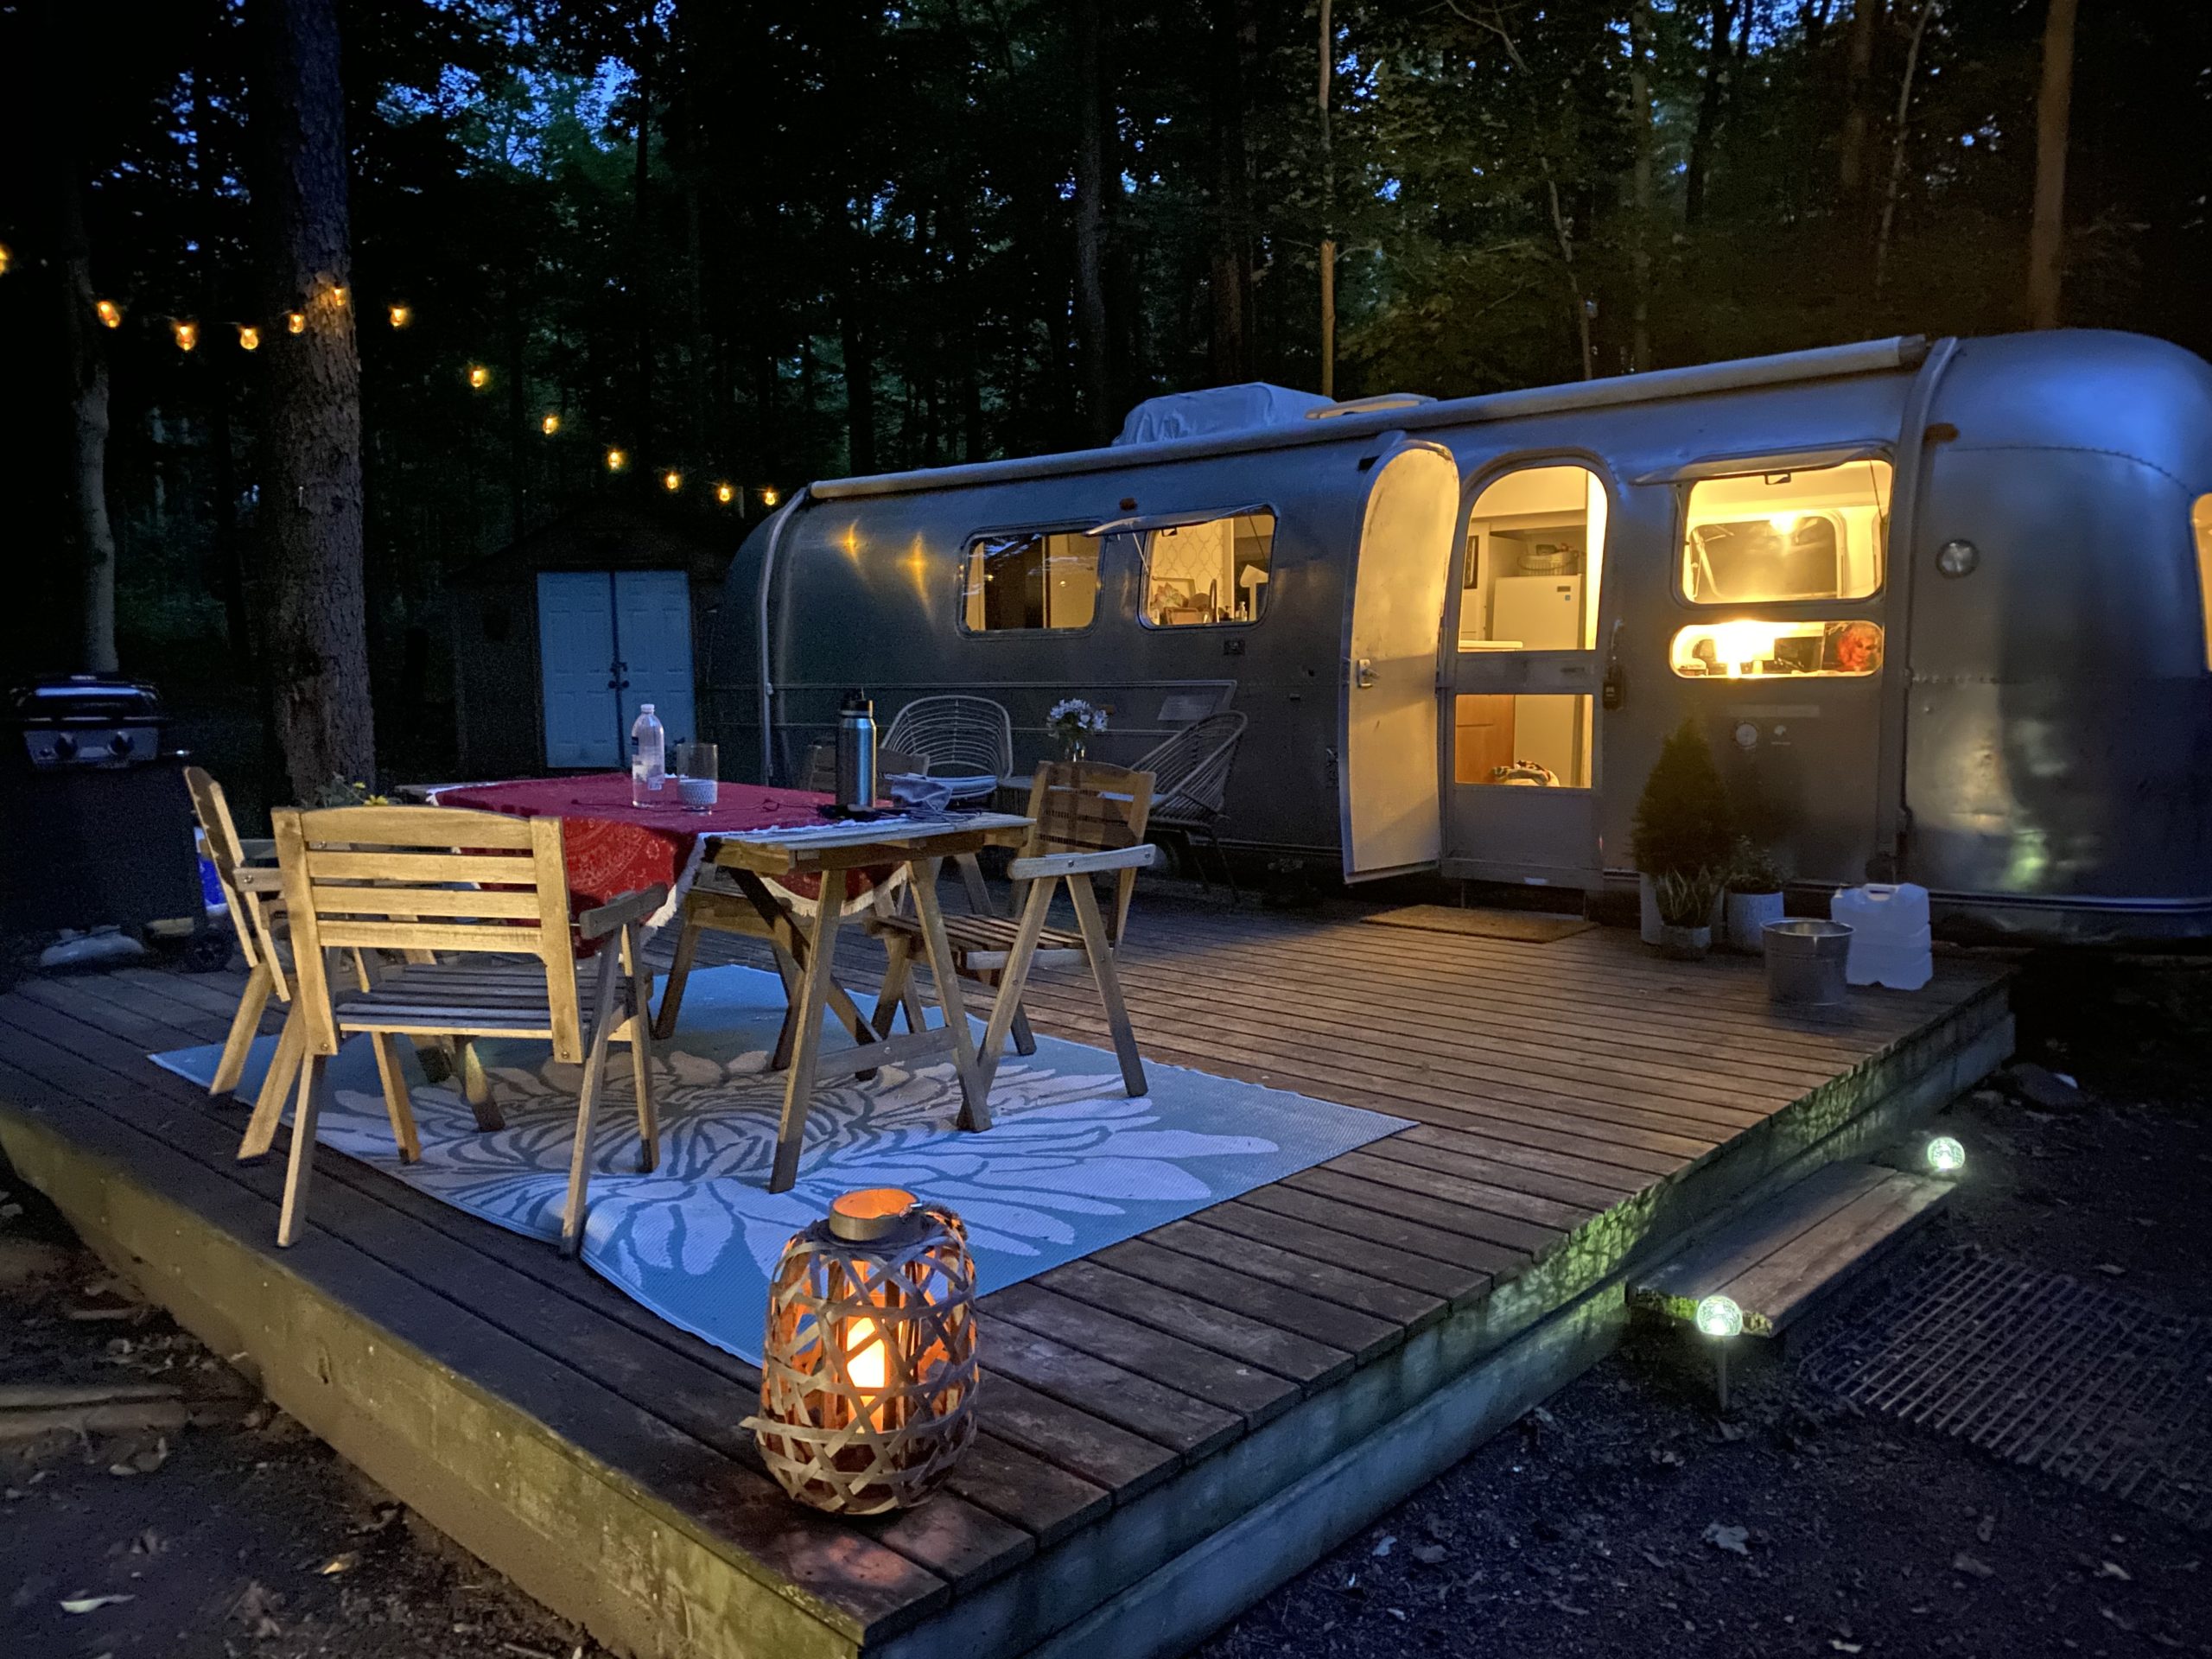 A cozy airstream with string lights and an outdoor patio table.